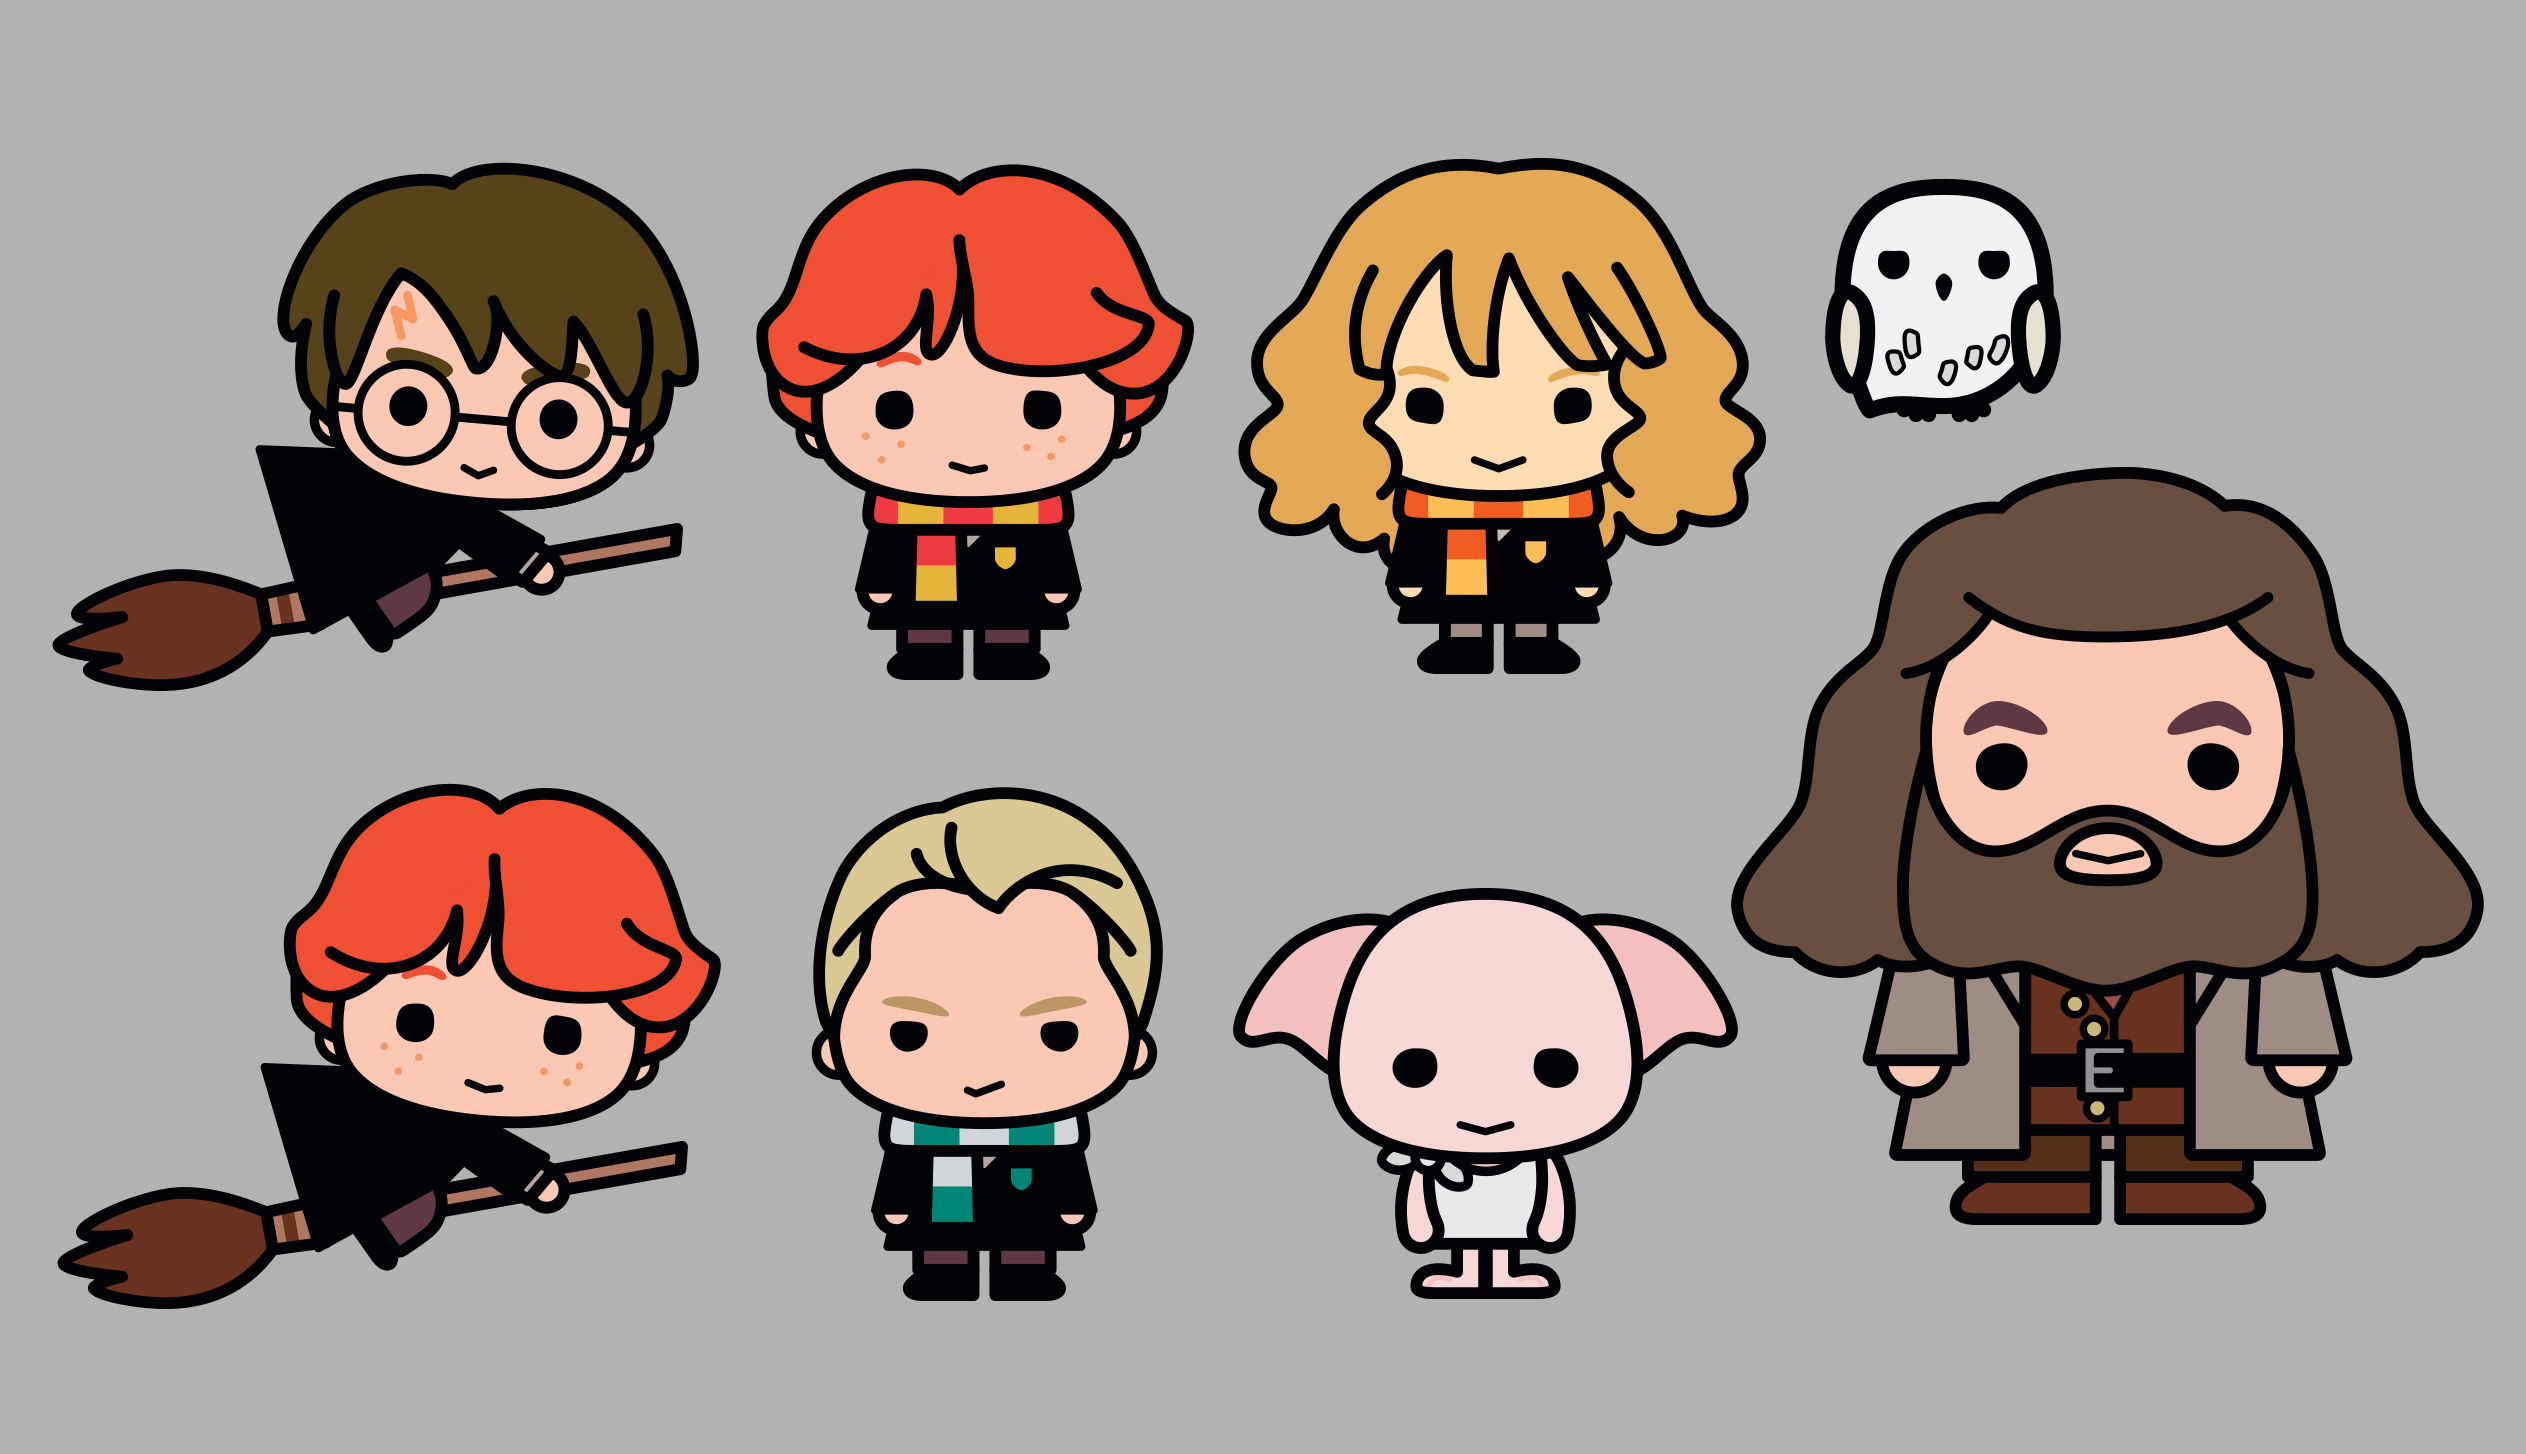 Harry Potter Chibi Style Vinyl Figurine Various Characters